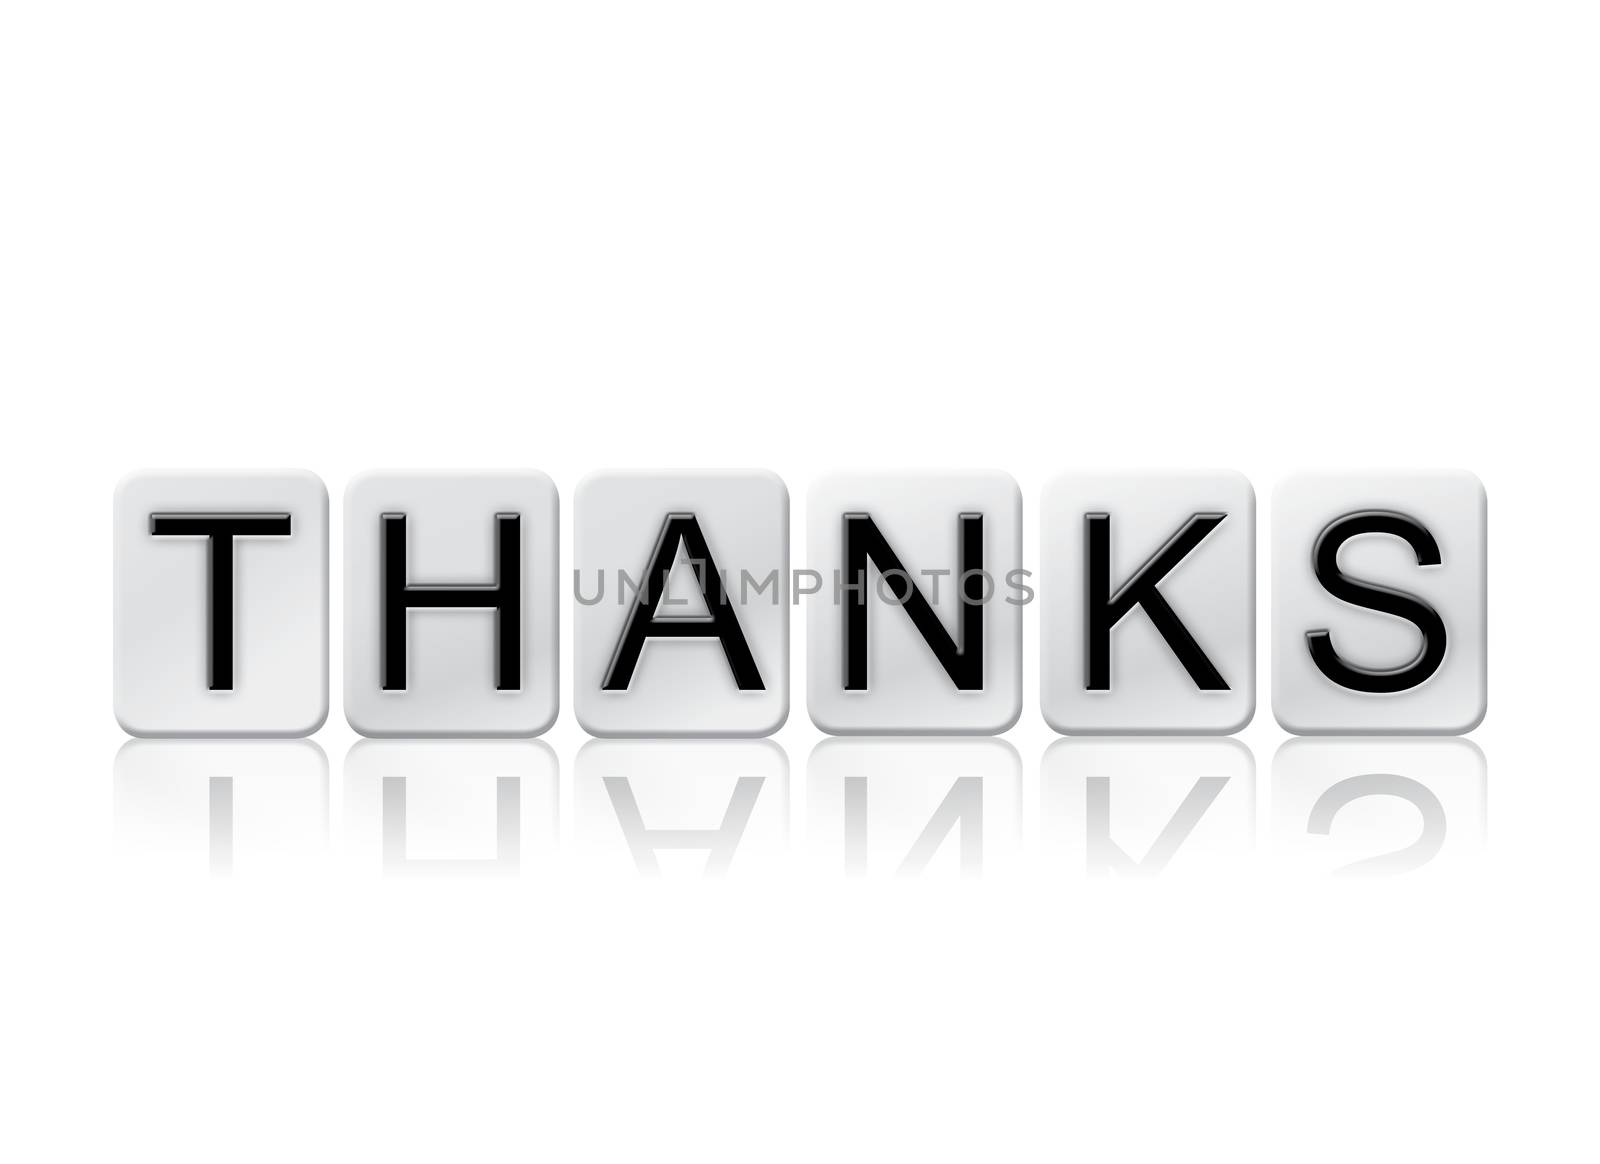 The word "Thanks" written in tile letters isolated on a white background.